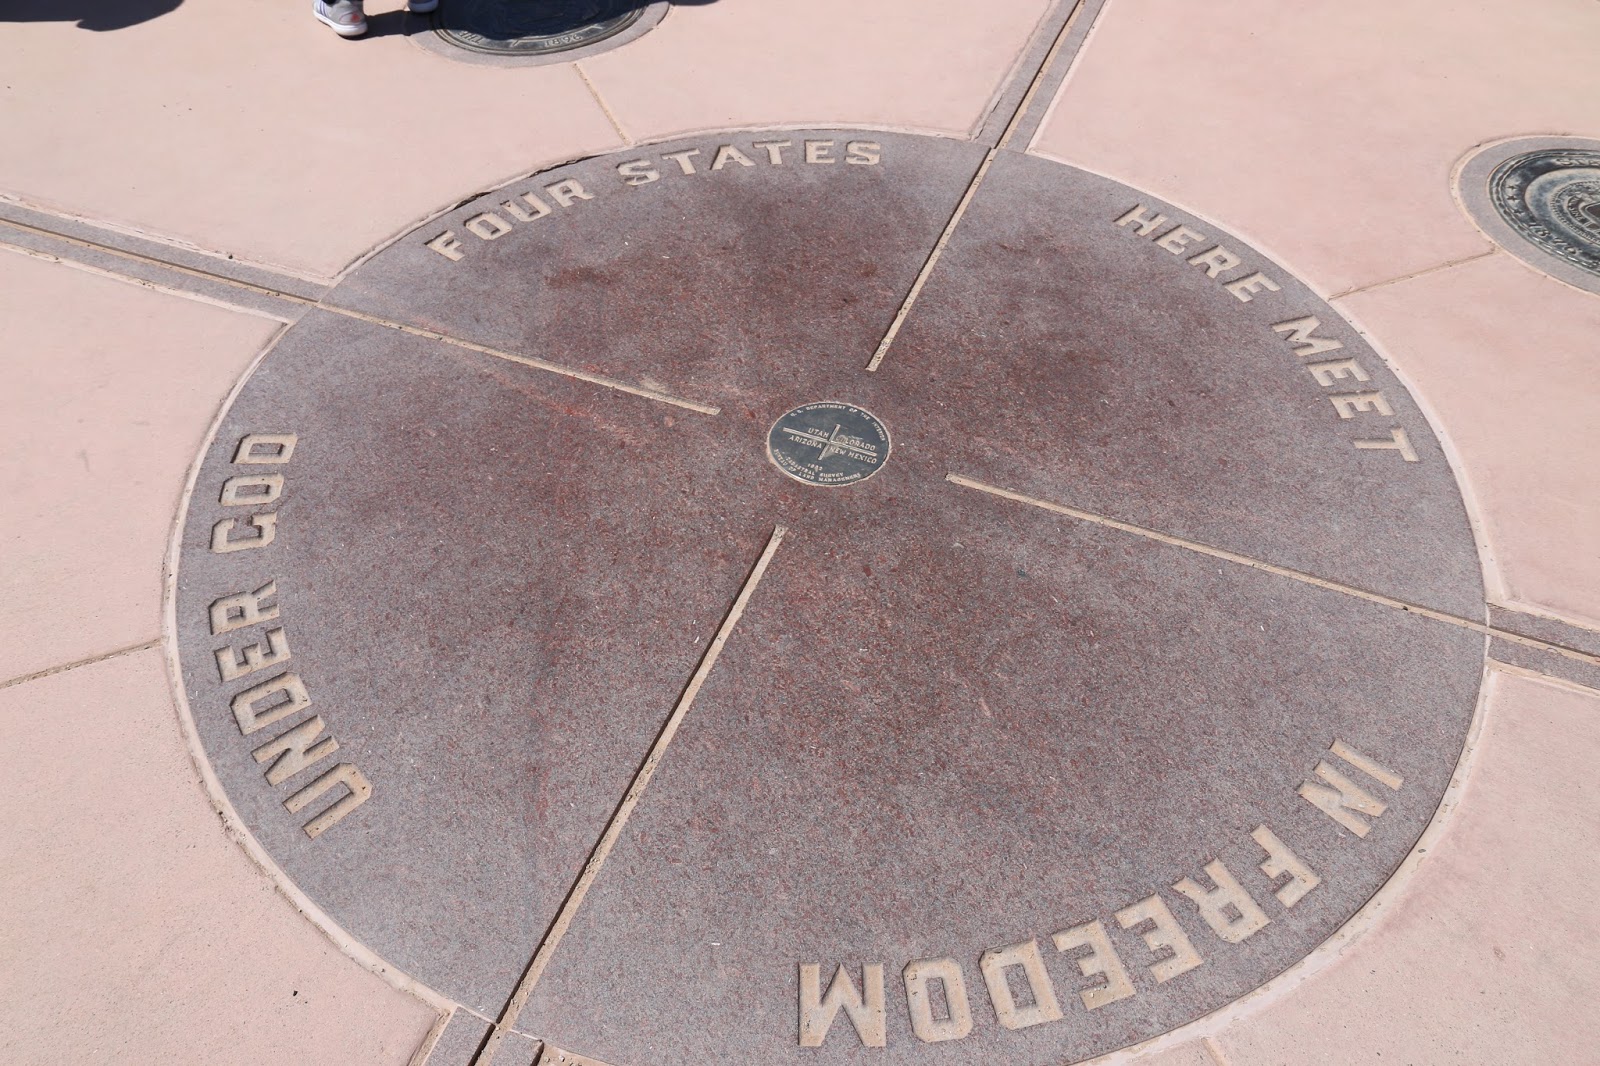 Disappointing Tourist Destinations - 4 Corners Monument.